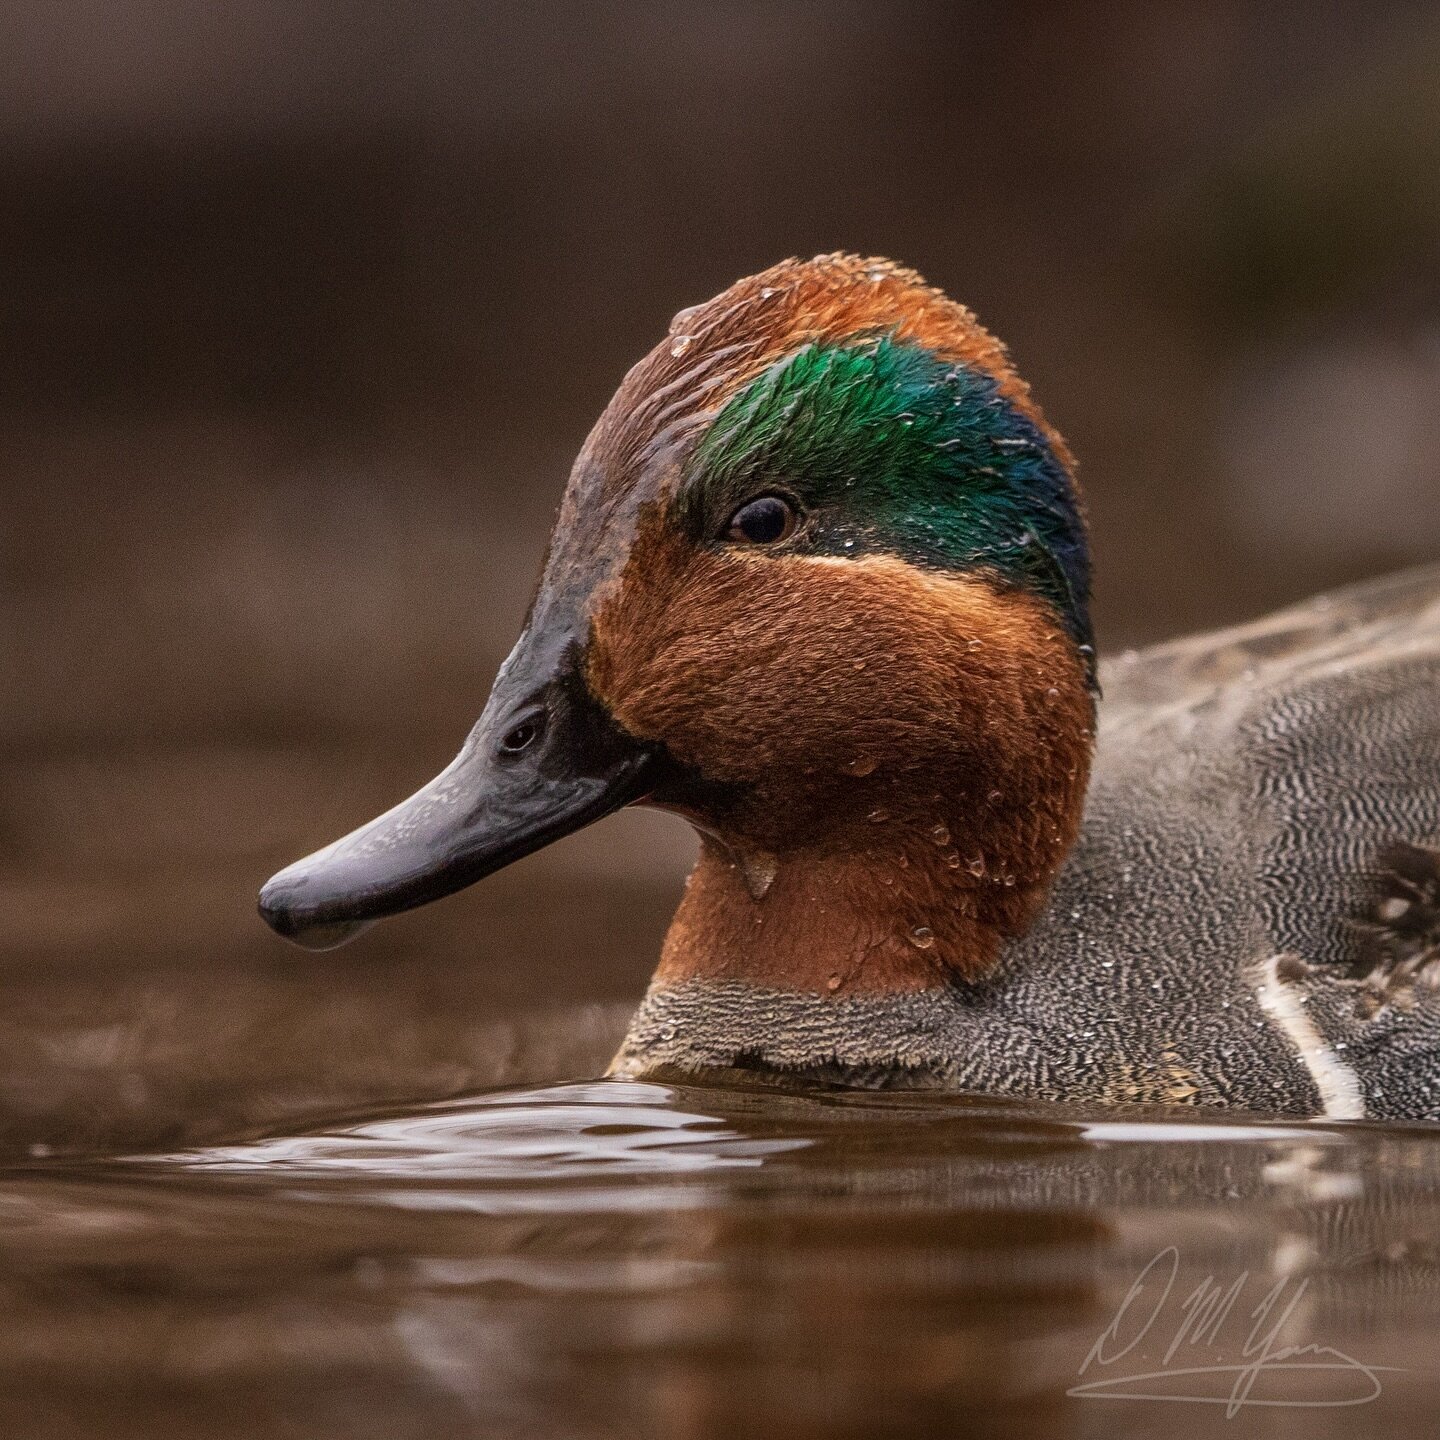 Love the colors in this Green-winged Teal from Saturday. I&rsquo;ve seen them many times before, but never this close. There were also mallards very close by, so it was easy to see how much smaller the teals are compared to them - about half!
_____
#